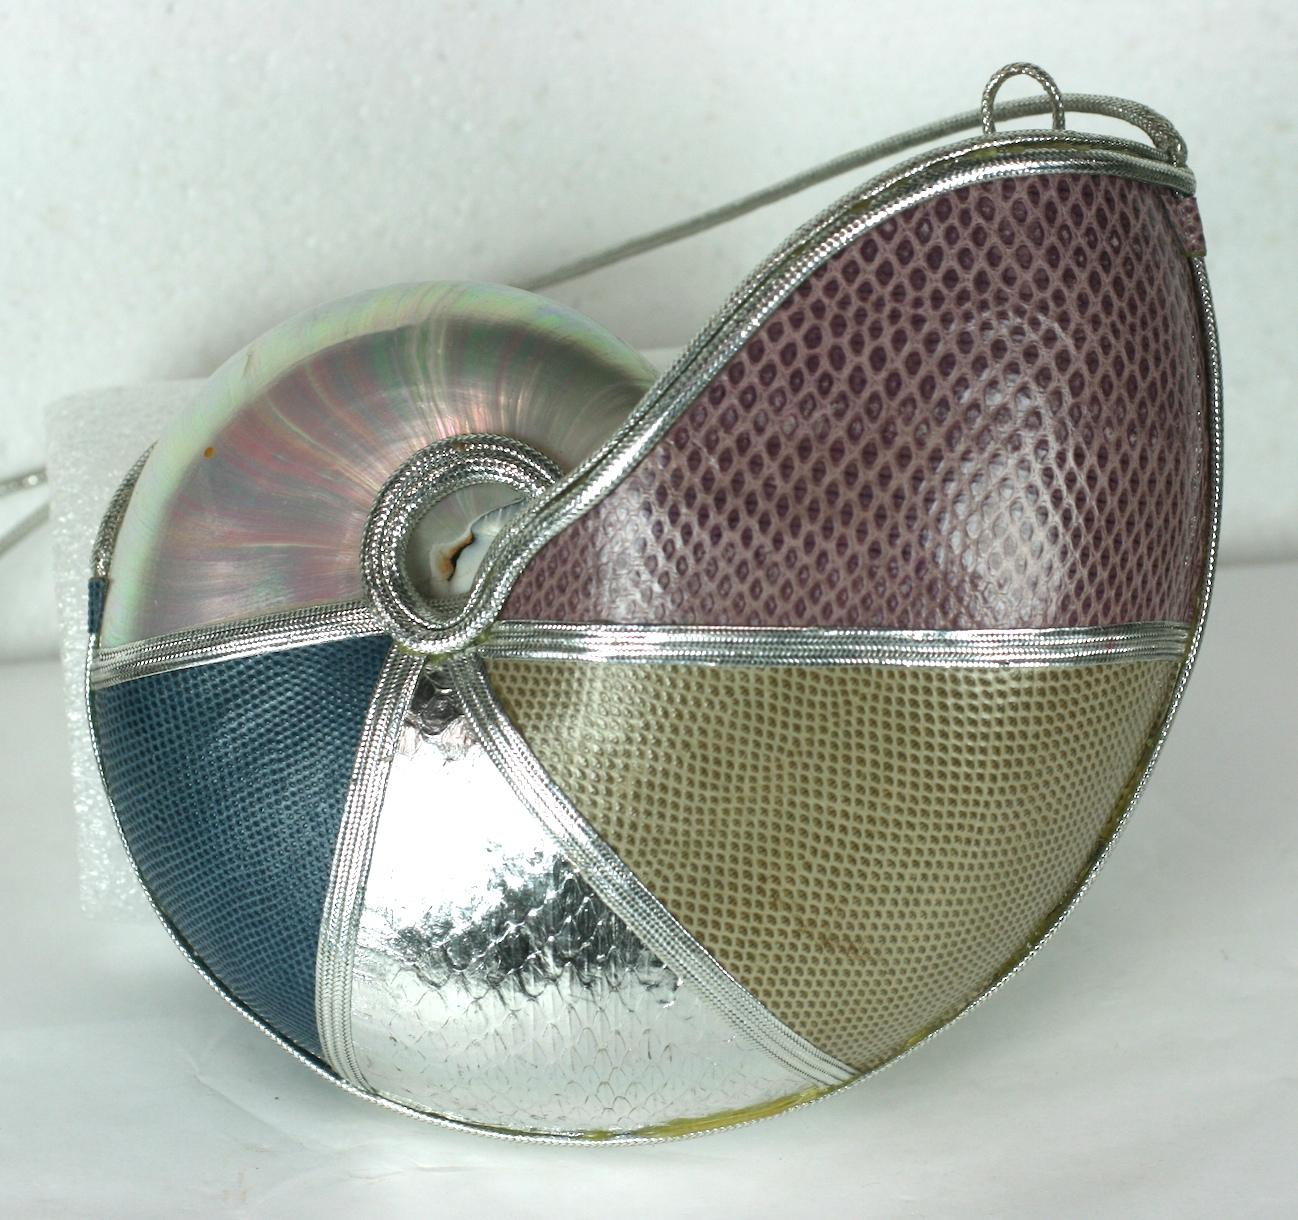 Unusual Nautilus Shell Purse clad in different panels of colored snakeskin in shades of rasberry, tan, teal and metallic silver which reflect the tones in the nacre of the shell. All the edges are covered in silver cording. Silver loop opens cover